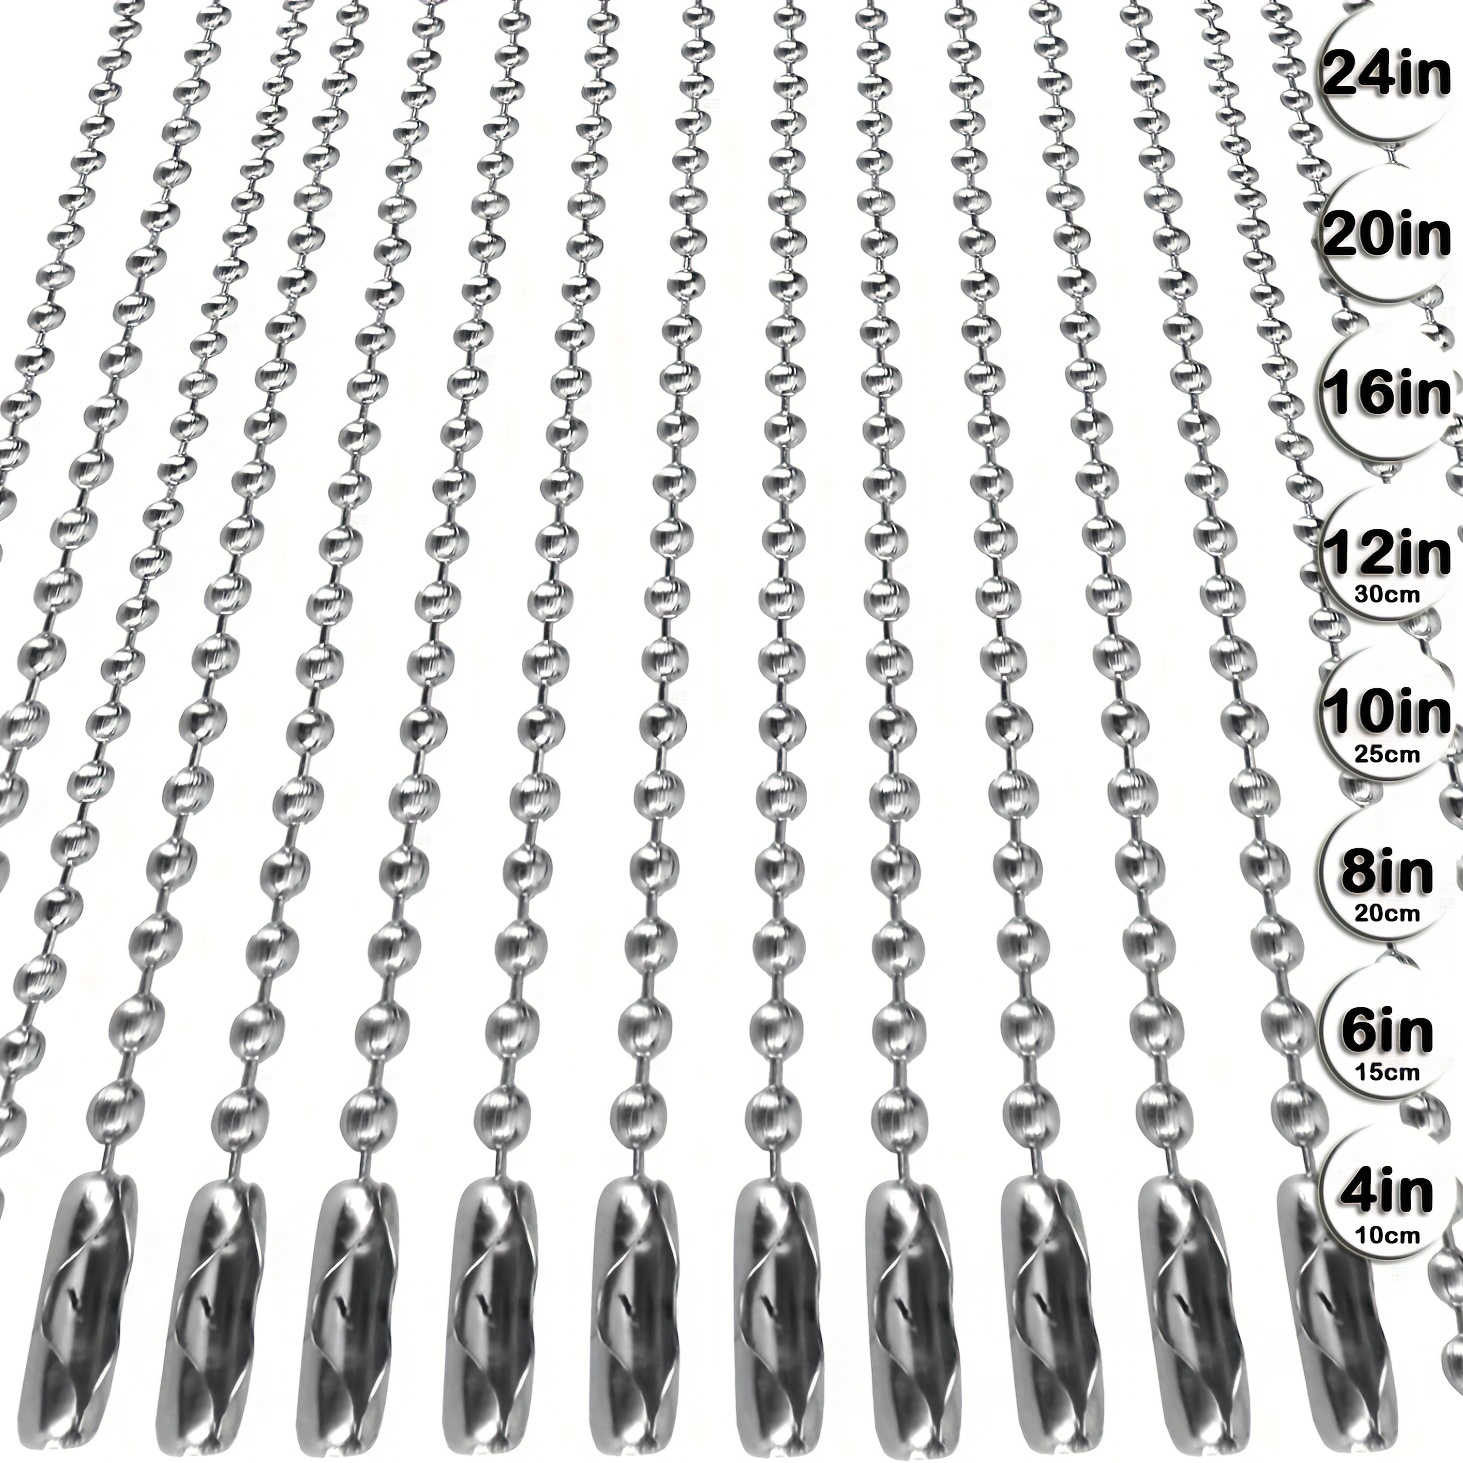 Stainless Steel Beaded Ball Chain Bulk Ball Bead Chains For DIY Necklaces  Jewelry Making Accessories 1.5 2 2.4 3 4 5 6 8 10 mm